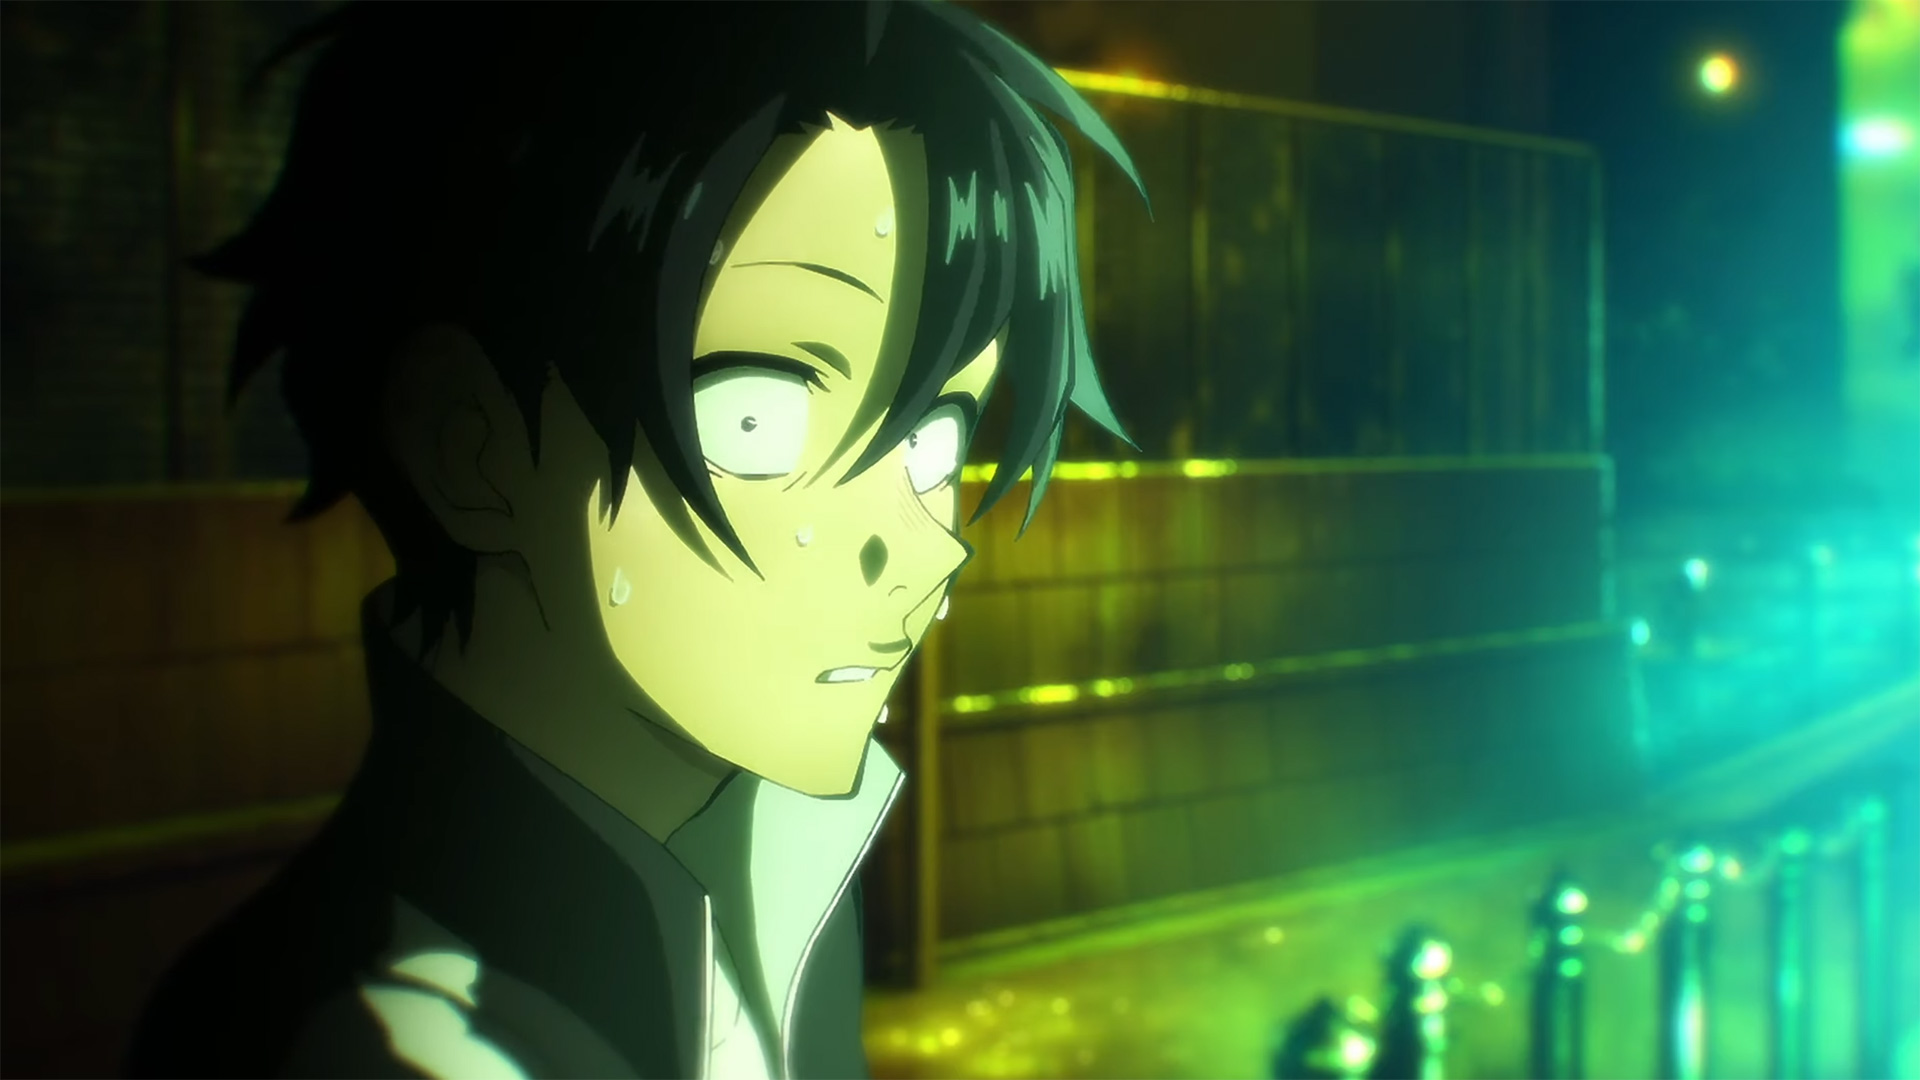 Call of the Night Anime Preview Trailer and Images for Episode 5